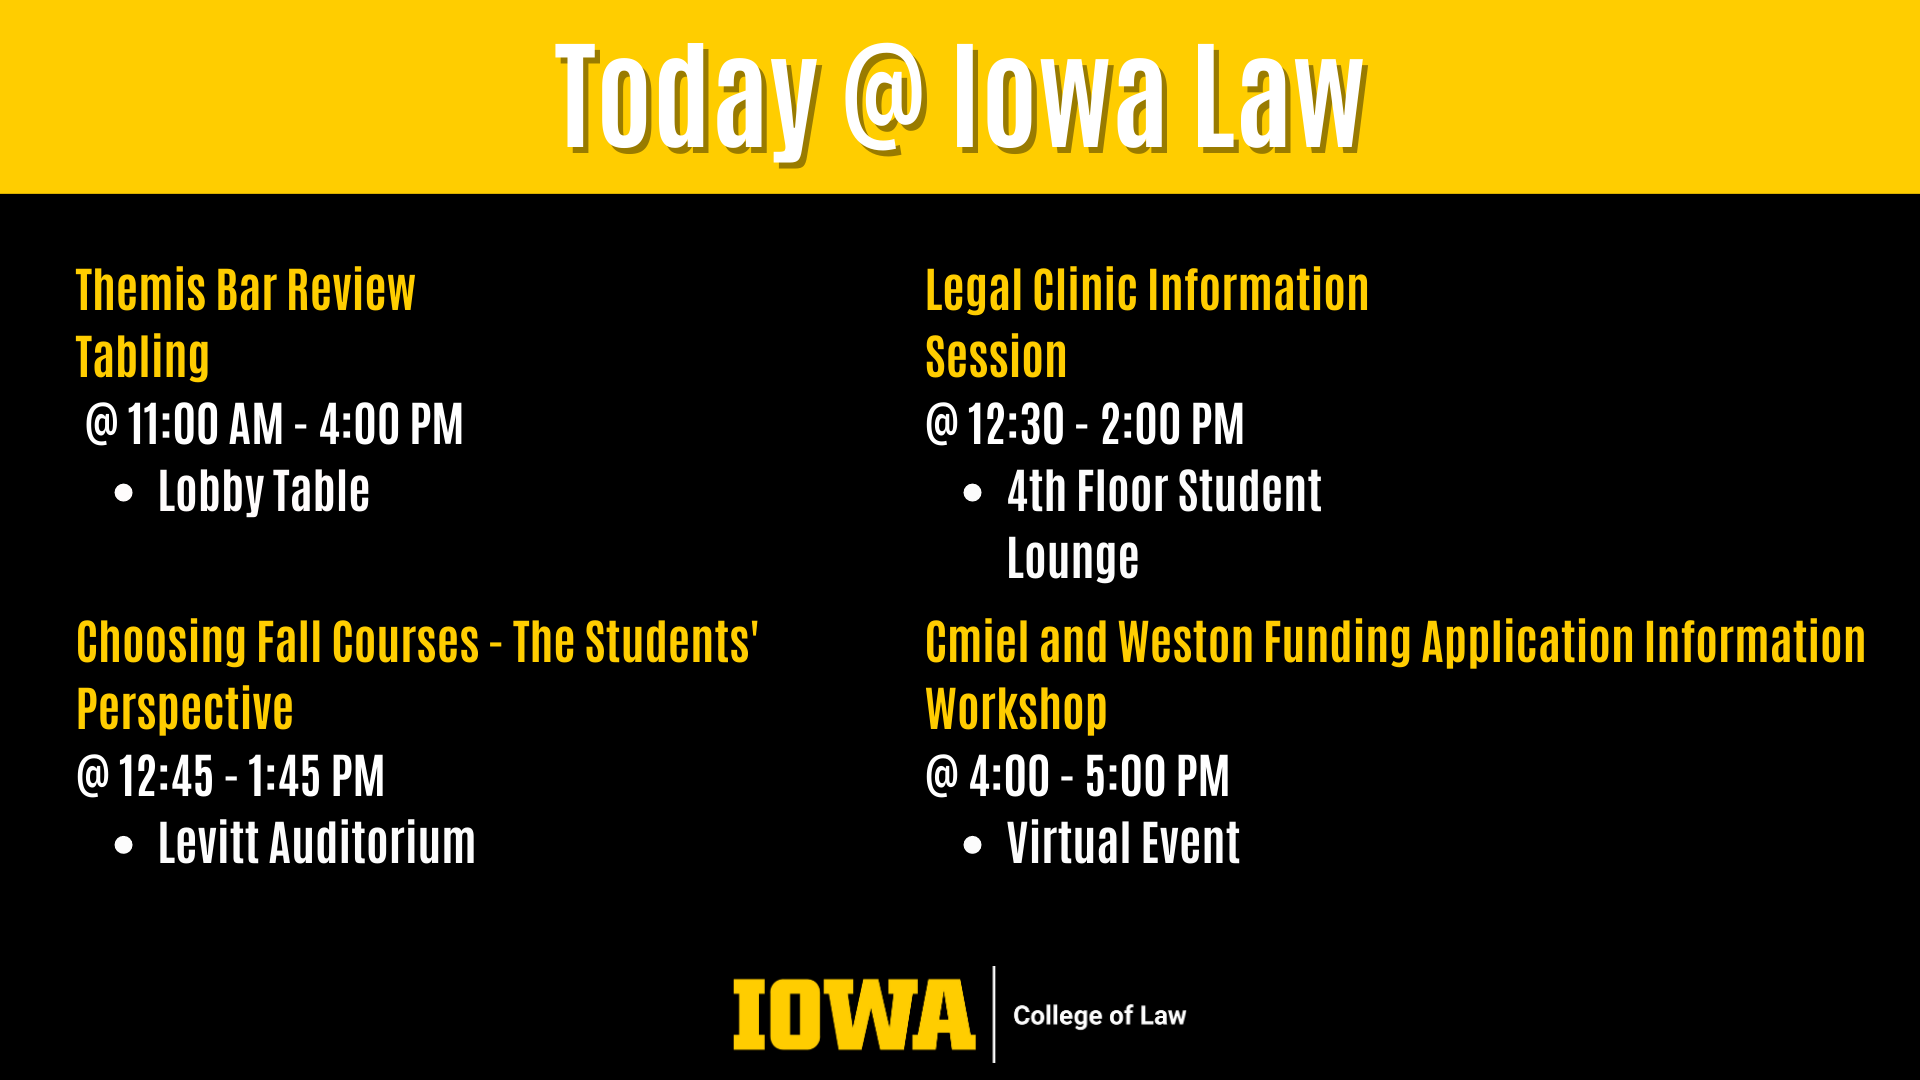 Themis Bar Review Tabling  @ 11:00 AM - 4:00 PM Lobby Table Legal Clinic Information Session @ 12:30 - 2:00 PM 4th Floor Student Lounge Choosing Fall Courses - The Students' Perspective  @ 12:45 - 1:45 PM Levitt Auditorium Cmiel and Weston Funding Application Information Workshop  @ 4:00 - 5:00 PM Virtual Event